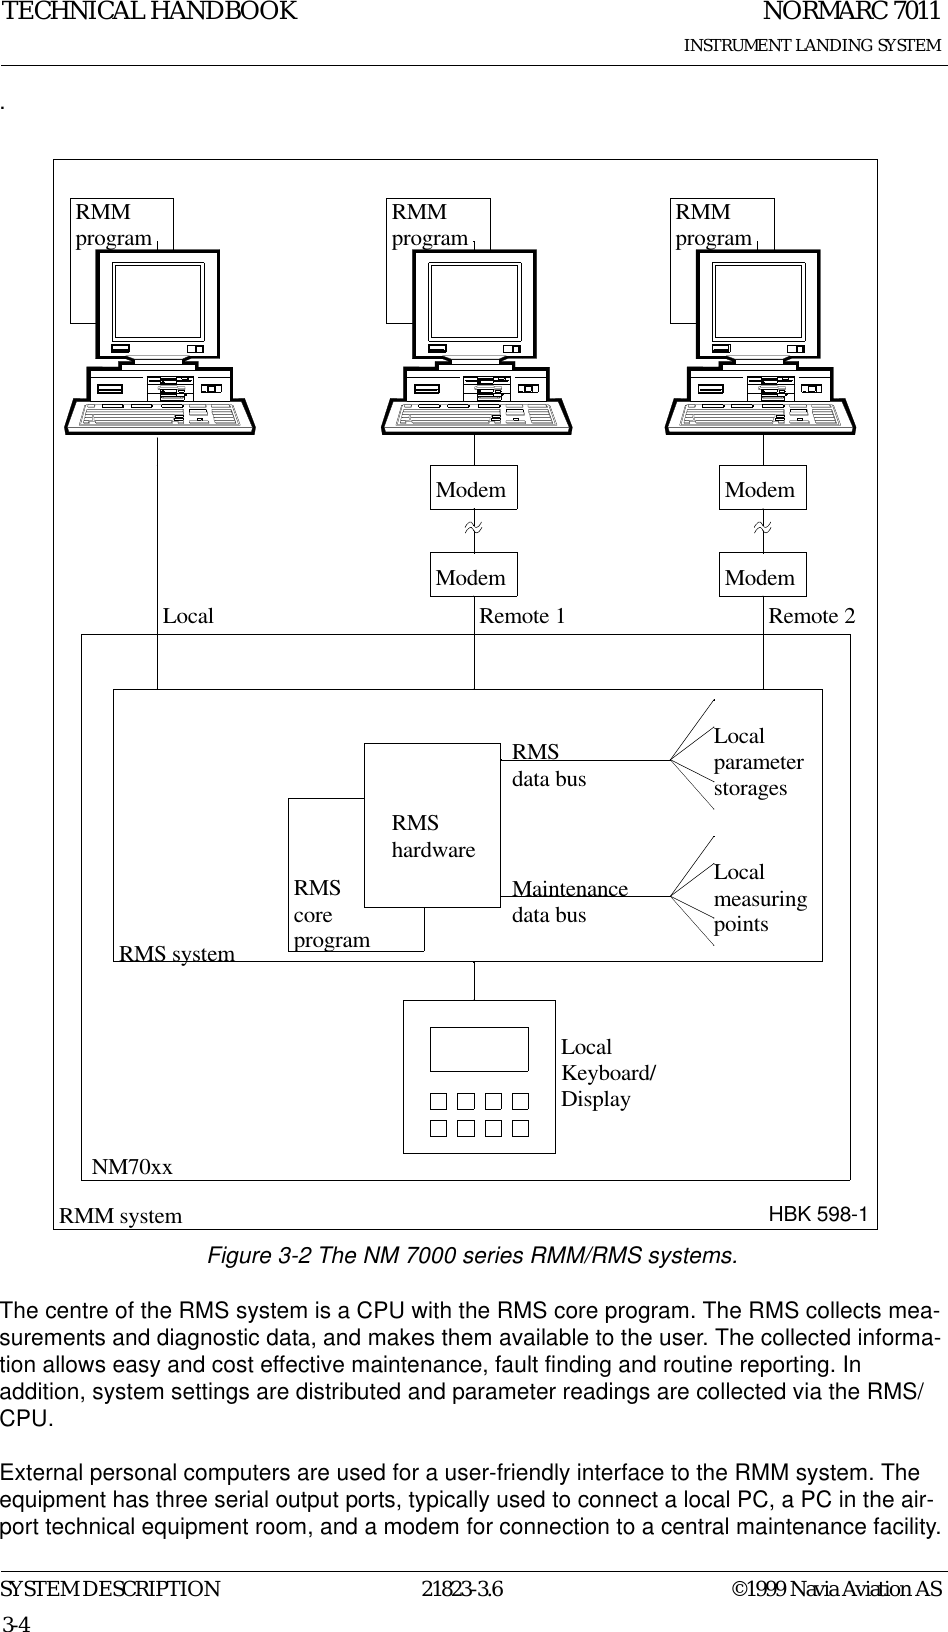 NORMARC 7011INSTRUMENT LANDING SYSTEMTECHNICAL HANDBOOKSYSTEM DESCRIPTION 21823-3.6 ©1999 Navia Aviation AS3-4.Figure 3-2 The NM 7000 series RMM/RMS systems.The centre of the RMS system is a CPU with the RMS core program. The RMS collects mea-surements and diagnostic data, and makes them available to the user. The collected informa-tion allows easy and cost effective maintenance, fault finding and routine reporting. In addition, system settings are distributed and parameter readings are collected via the RMS/CPU.External personal computers are used for a user-friendly interface to the RMM system. The equipment has three serial output ports, typically used to connect a local PC, a PC in the air-port technical equipment room, and a modem for connection to a central maintenance facility.RMShardwareRMScoreprogramLocalmeasuringpointsMaintenancedata busRMS data busLocalparameterstoragesLocalKeyboard/DisplayModemNM70xxRMS systemRMM systemLocal Remote 1 Remote 2RMM program RMM program RMMprogramModem ModemModemHBK 598-1